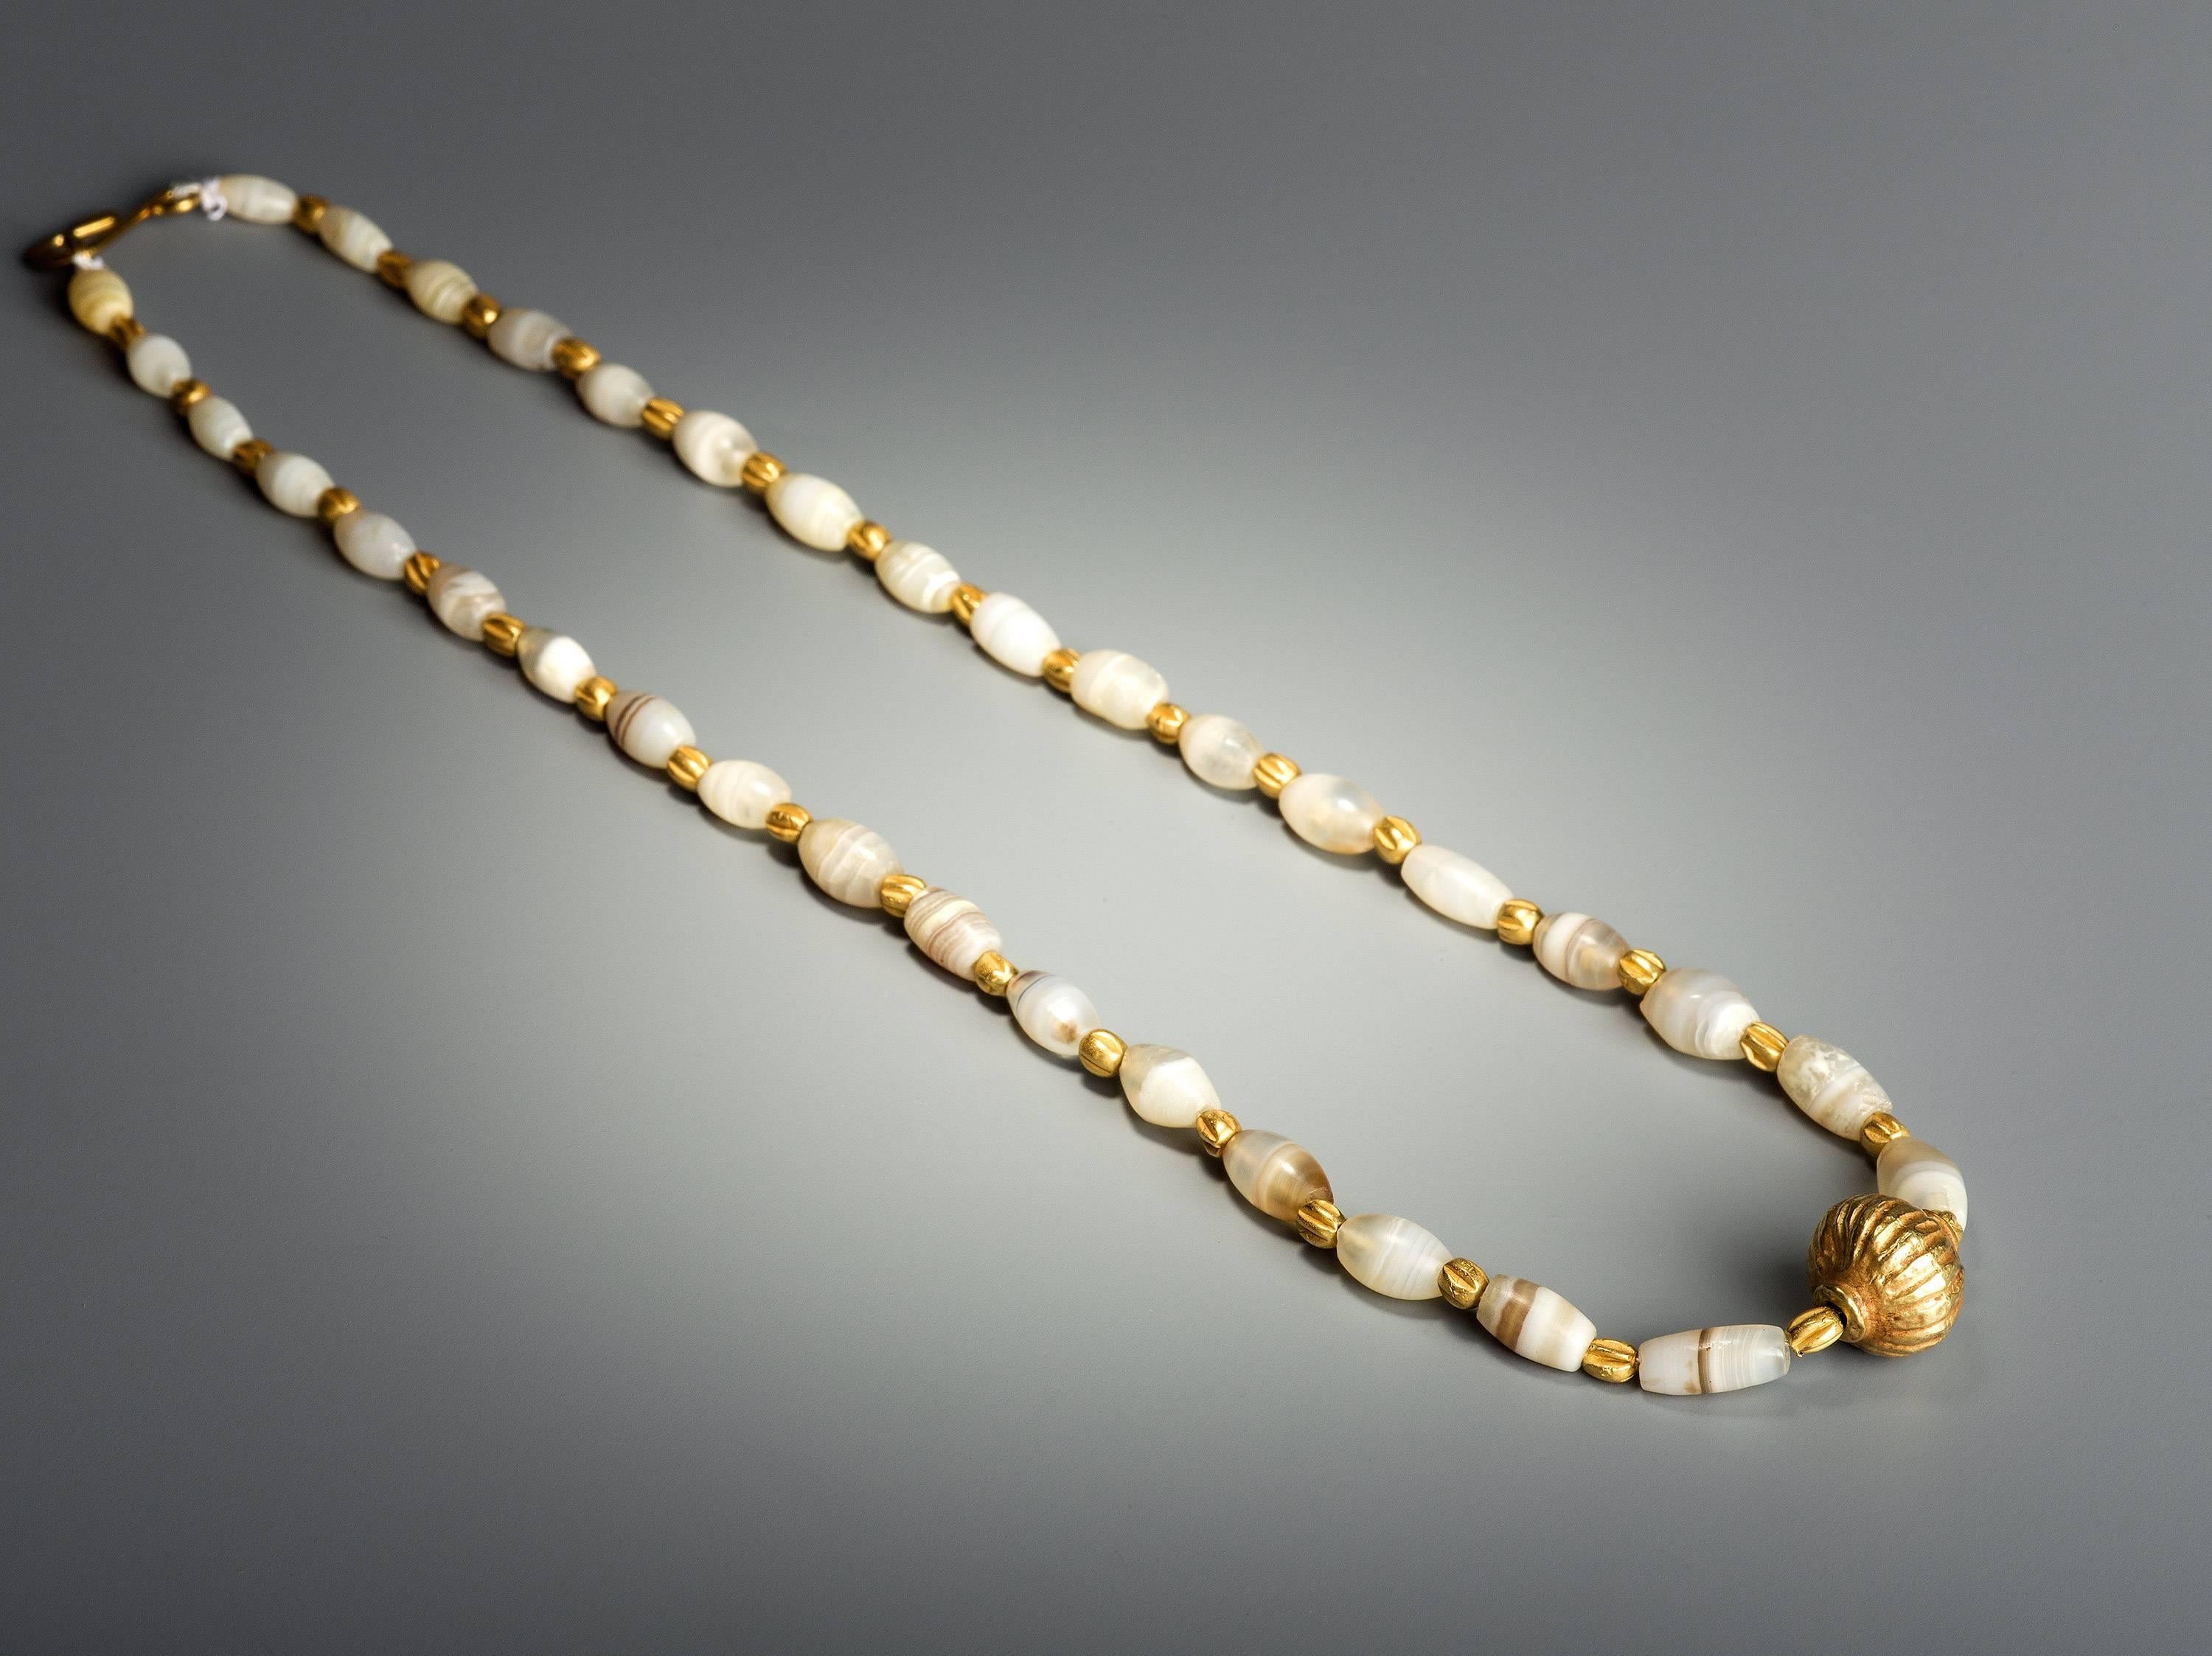 This elegant example of ancient jewellery is composed of opaque white and greyish brown agate beads interspersed with textured gold beads. The larger central gold bead is hollow and made from two halves. The necklace is restrung and the clasp is